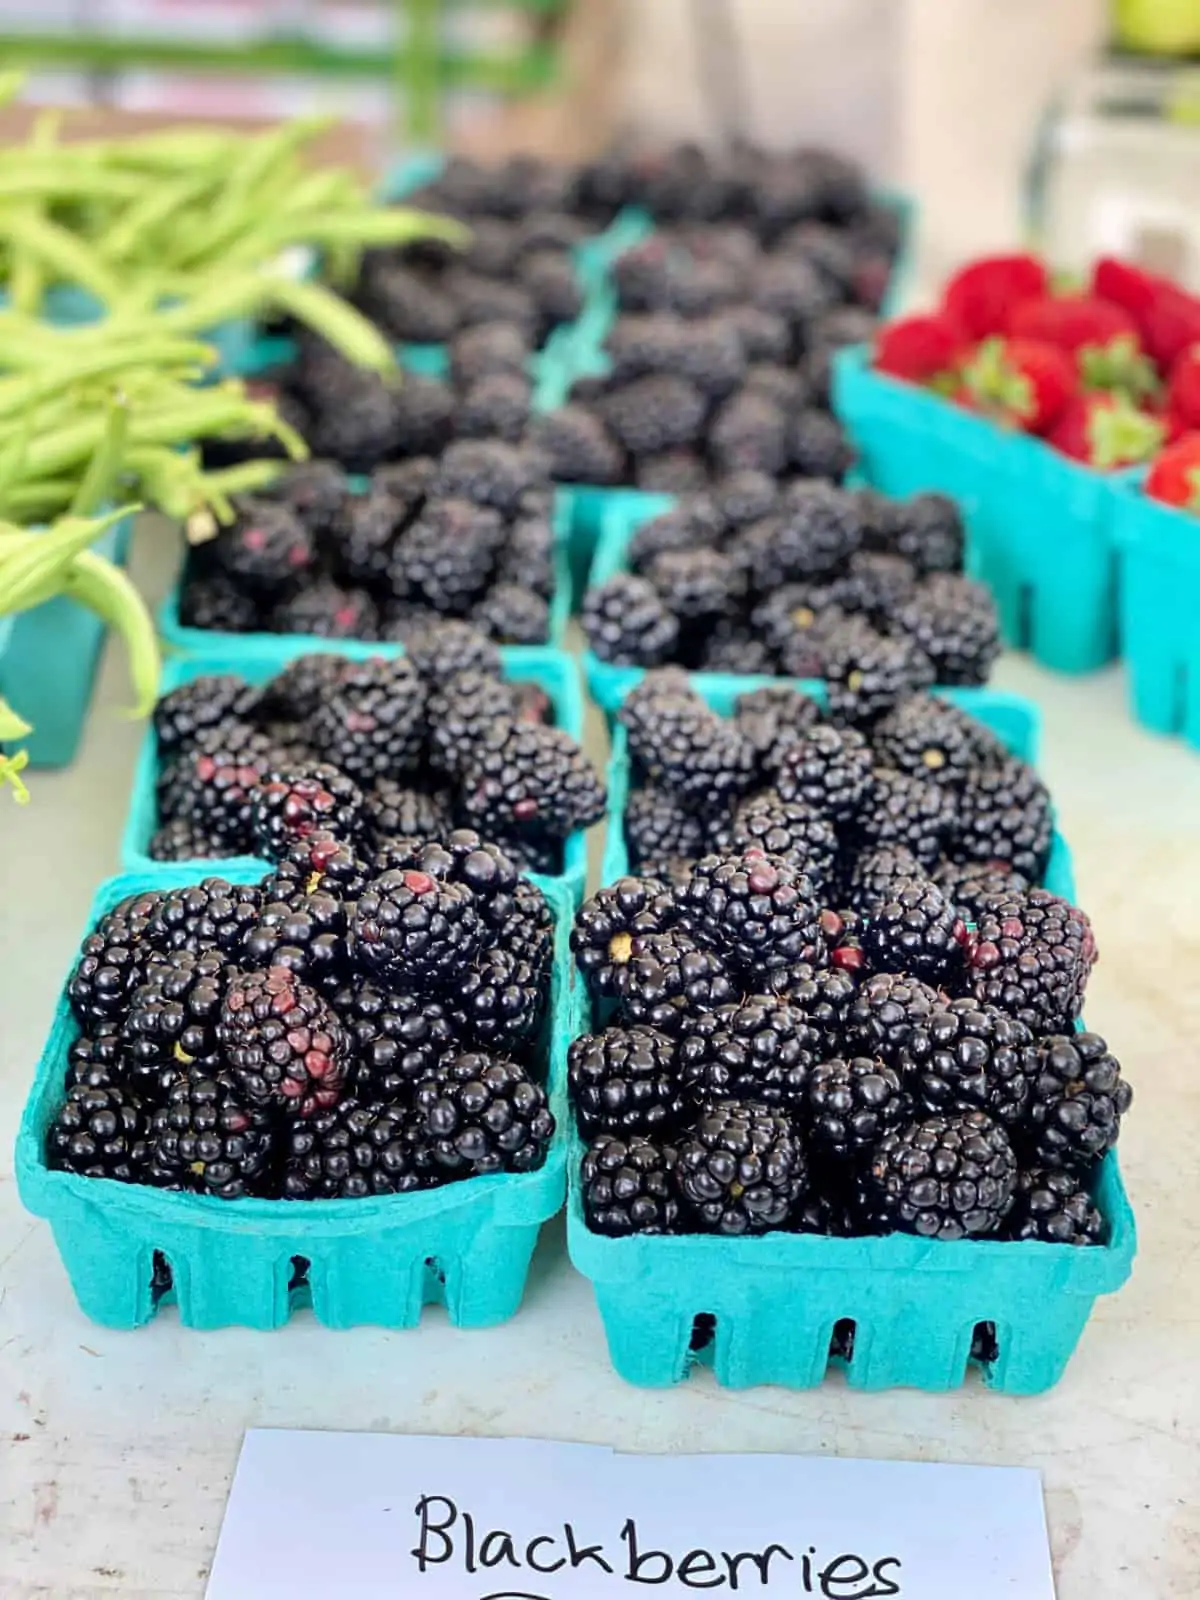 Two rows of baskets filled with blackberries for sale.